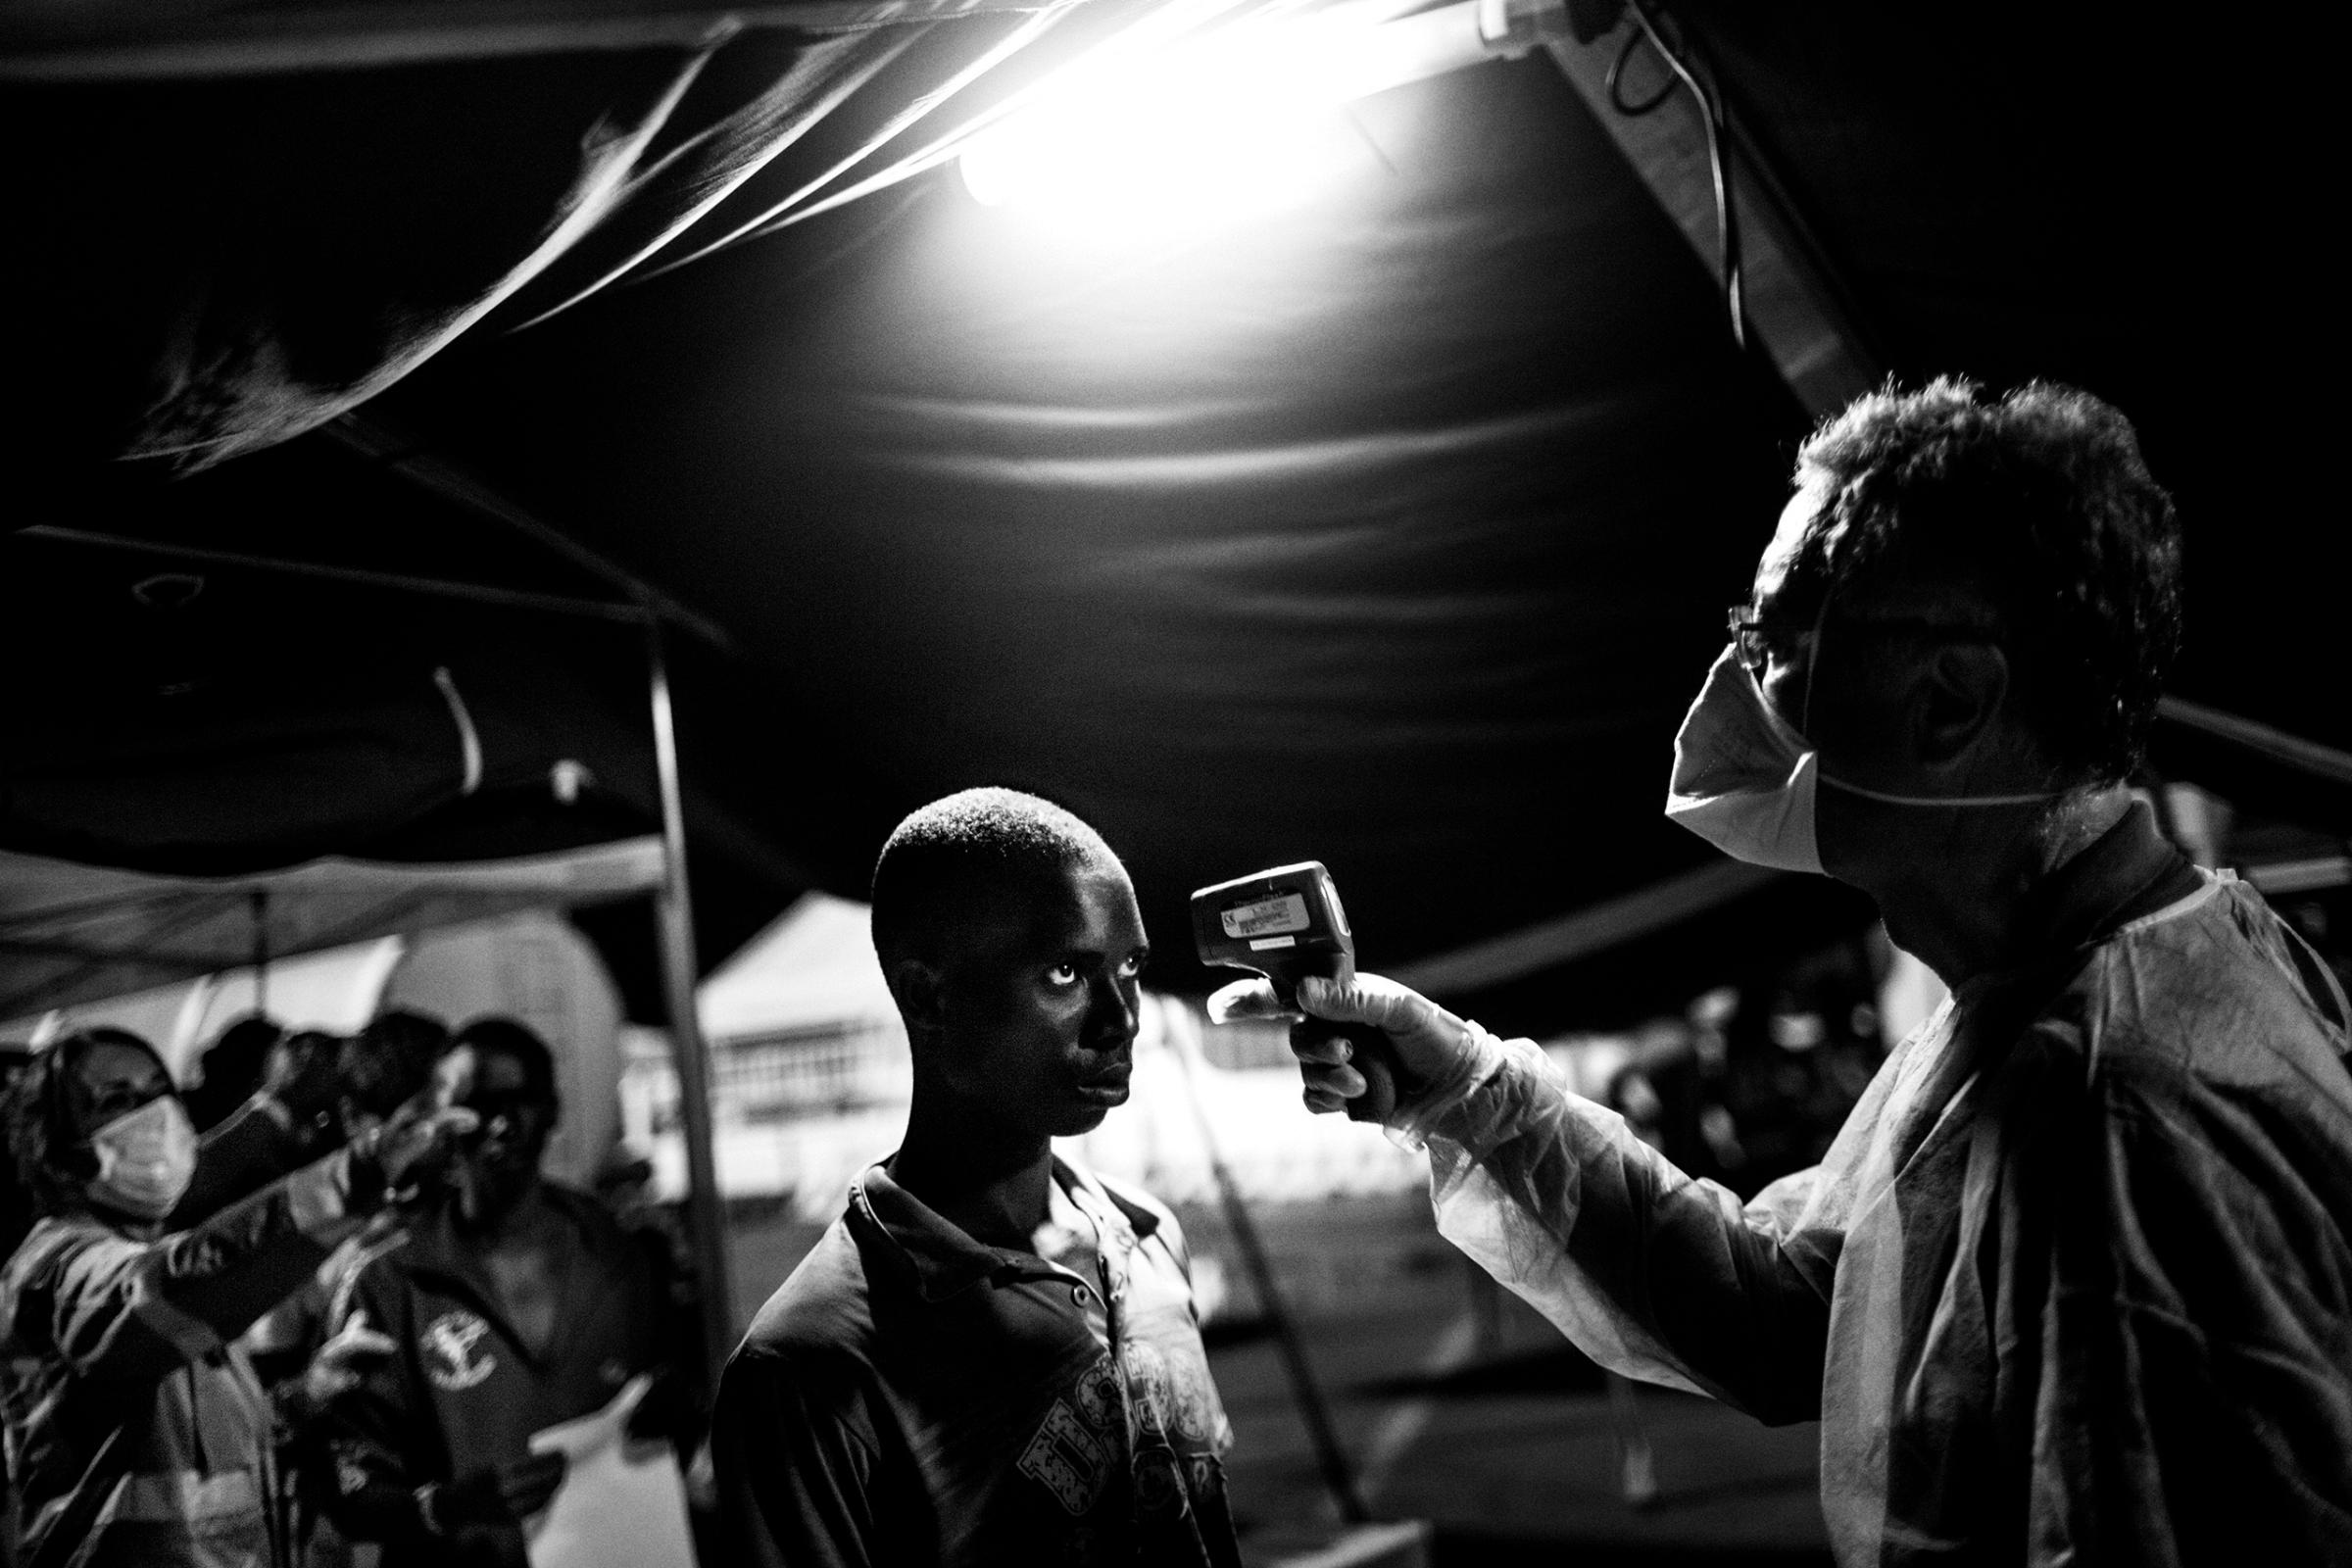 An Italian Red Cross doctor uses an electronic thermometer to take the temperature of a boy during the medical exam at the port of Messina, Italy, July 2015.